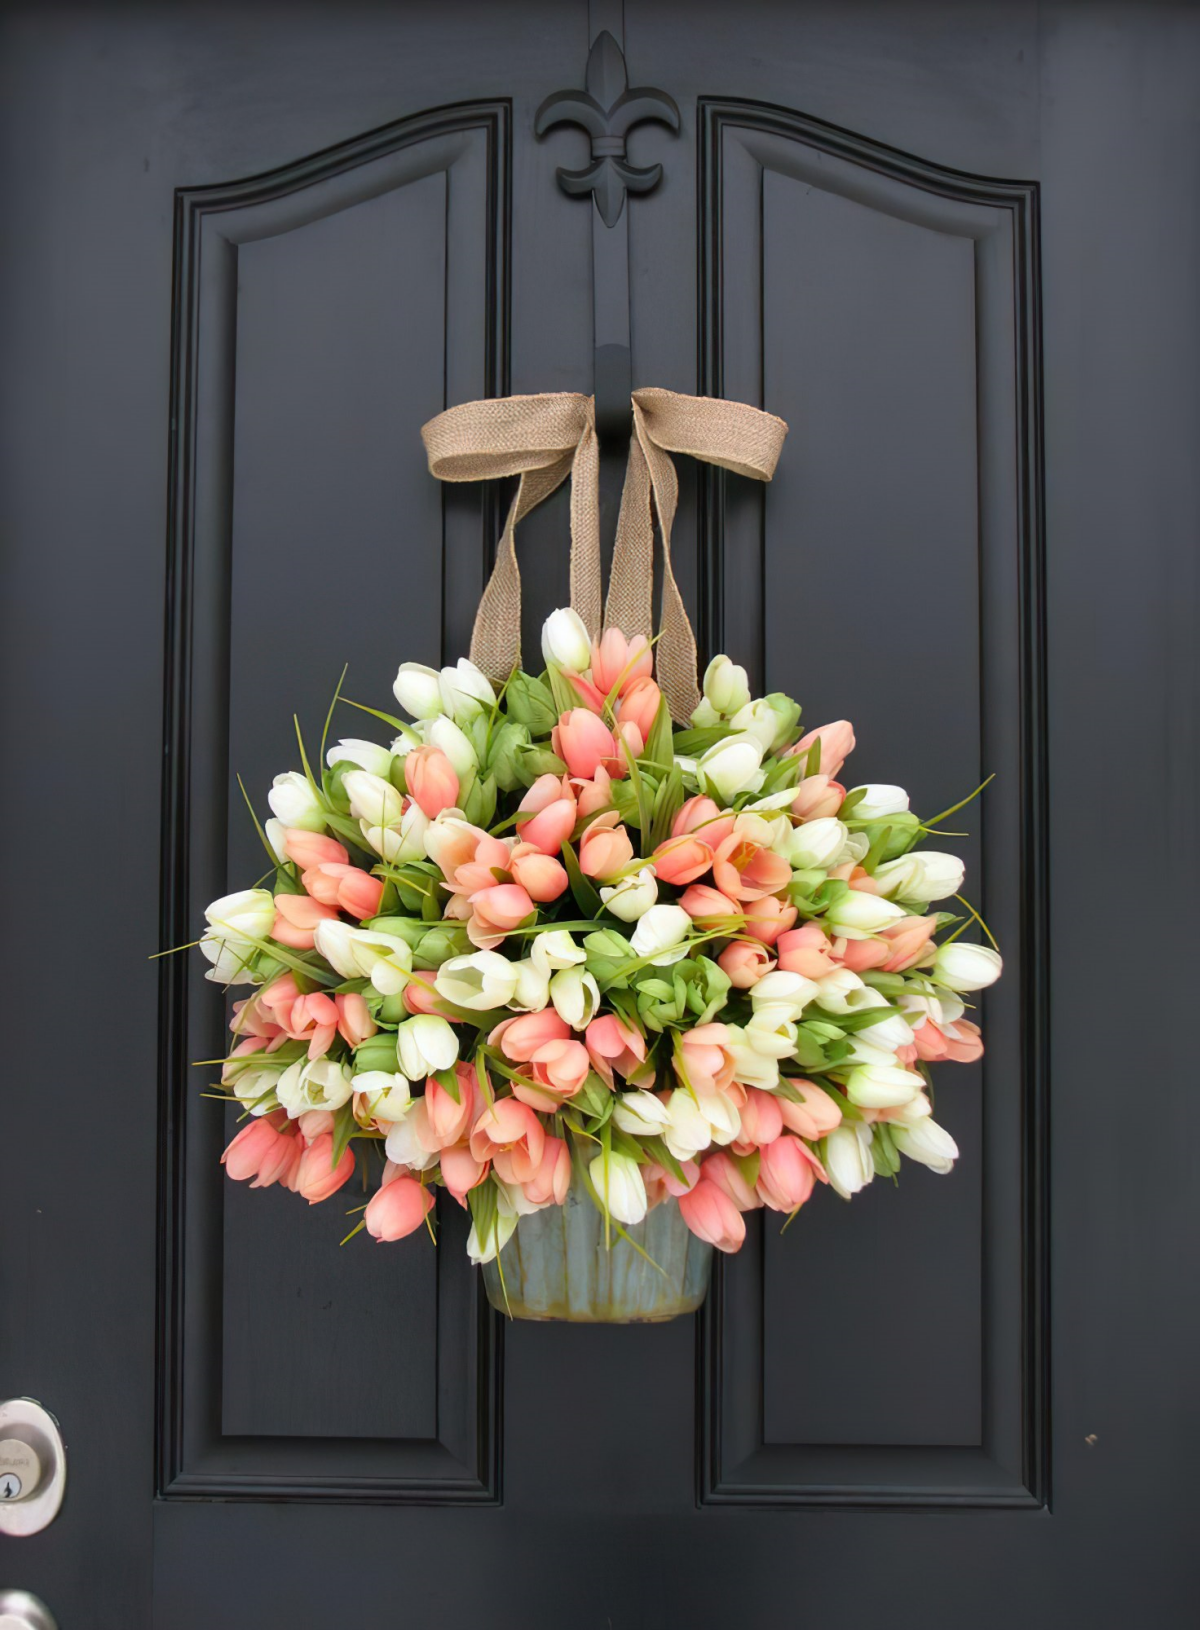 Hang tulips on the door and decorate.